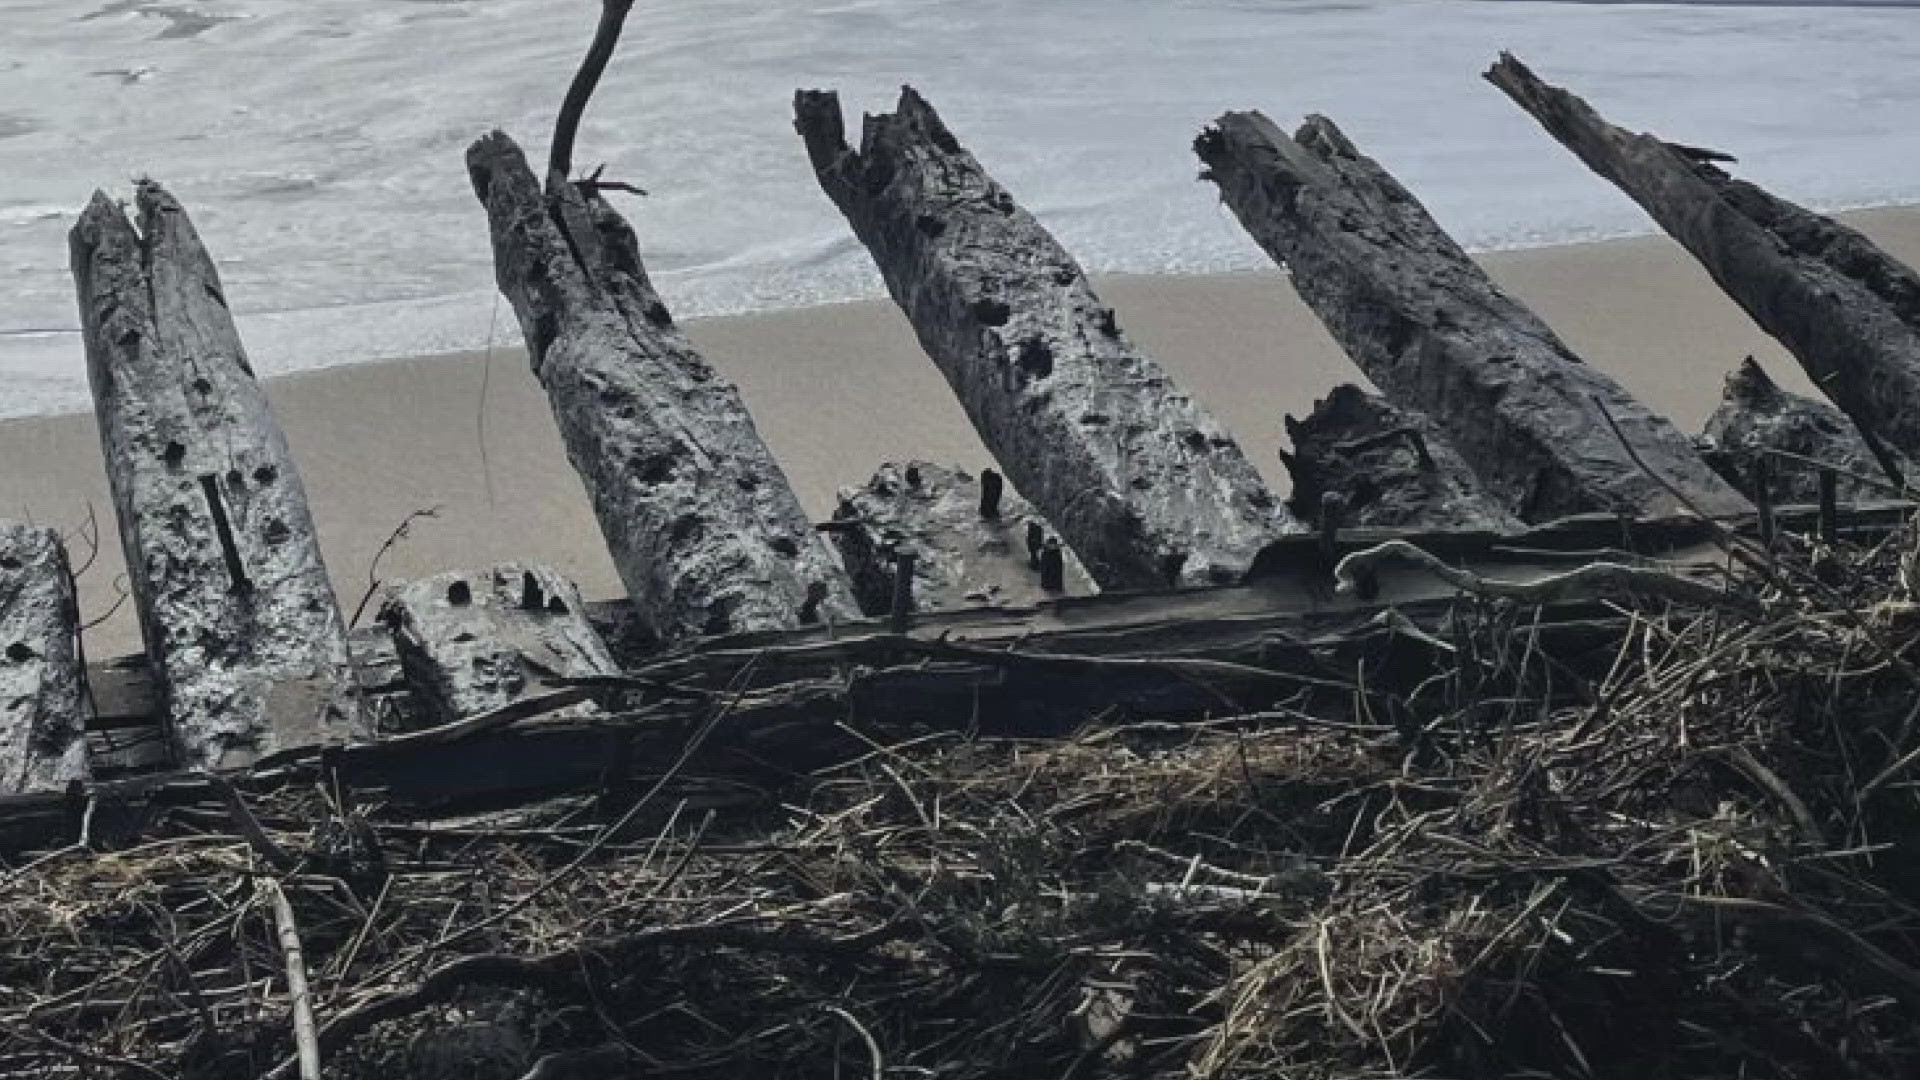 Wednesday's coastal storm was so powerful that it uncovered a part of Maine's history, the Tay schooner, which shipwrecked in 1911.